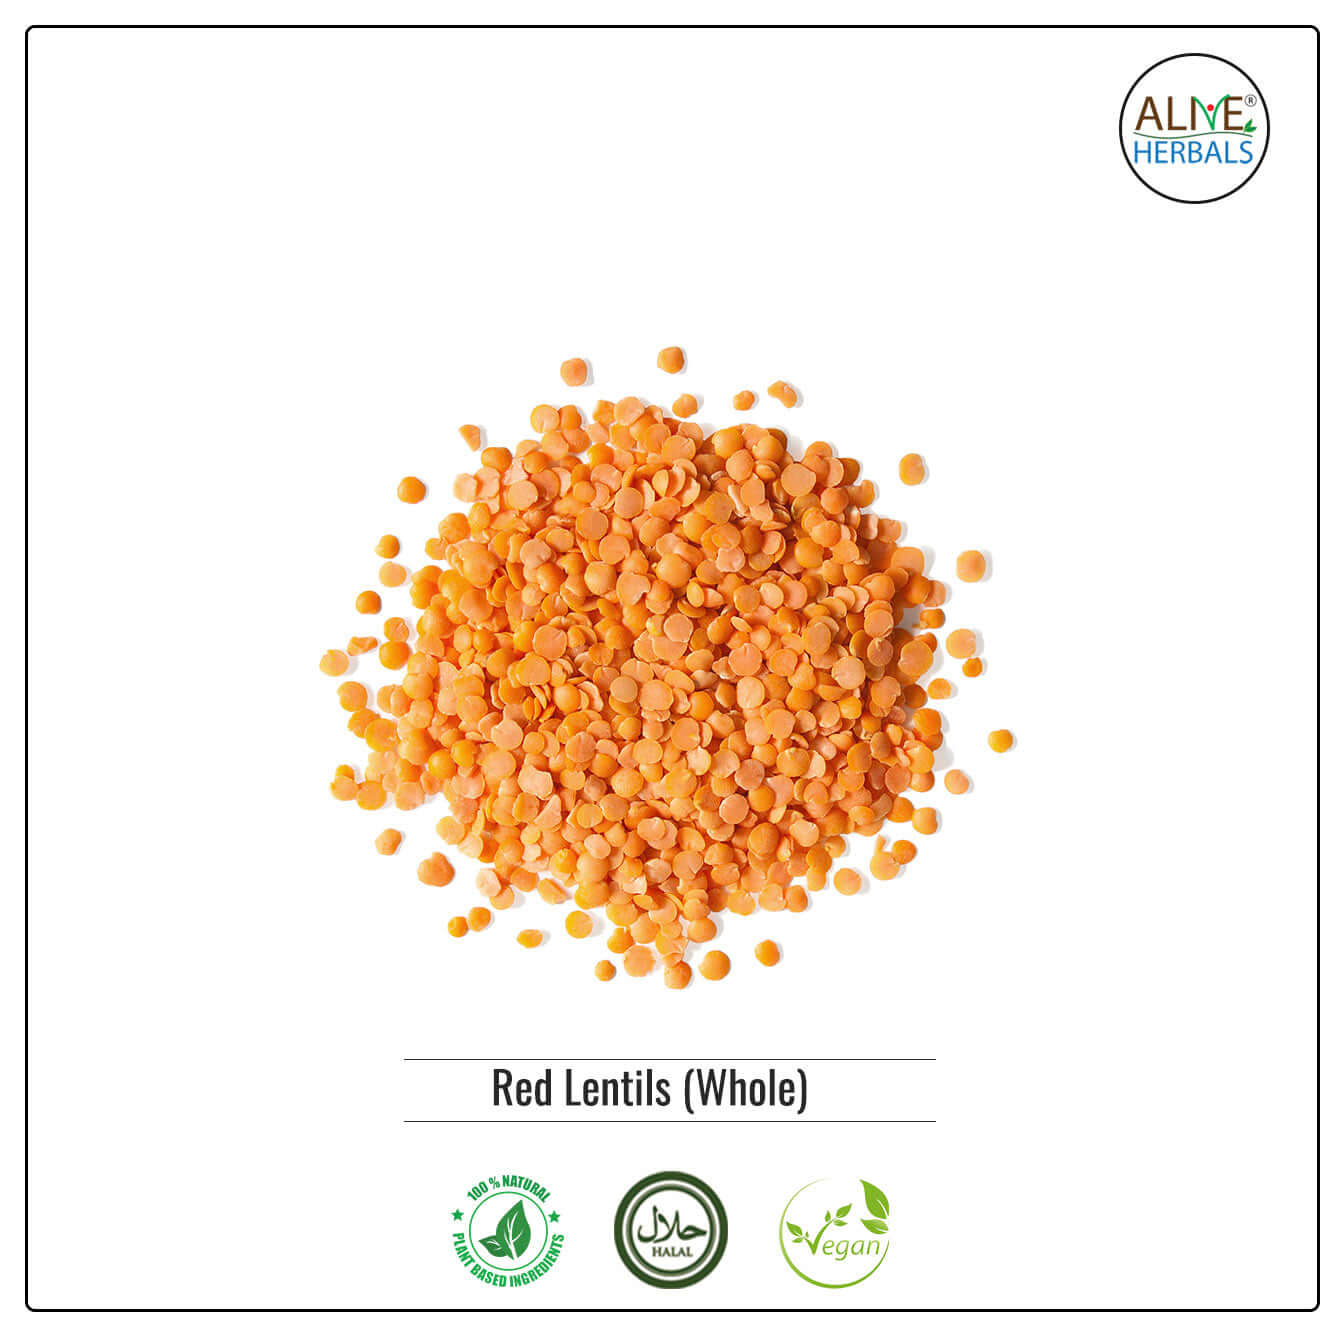 Red Lentils Whole - Shop at Natural Food Store | Alive Herbals.